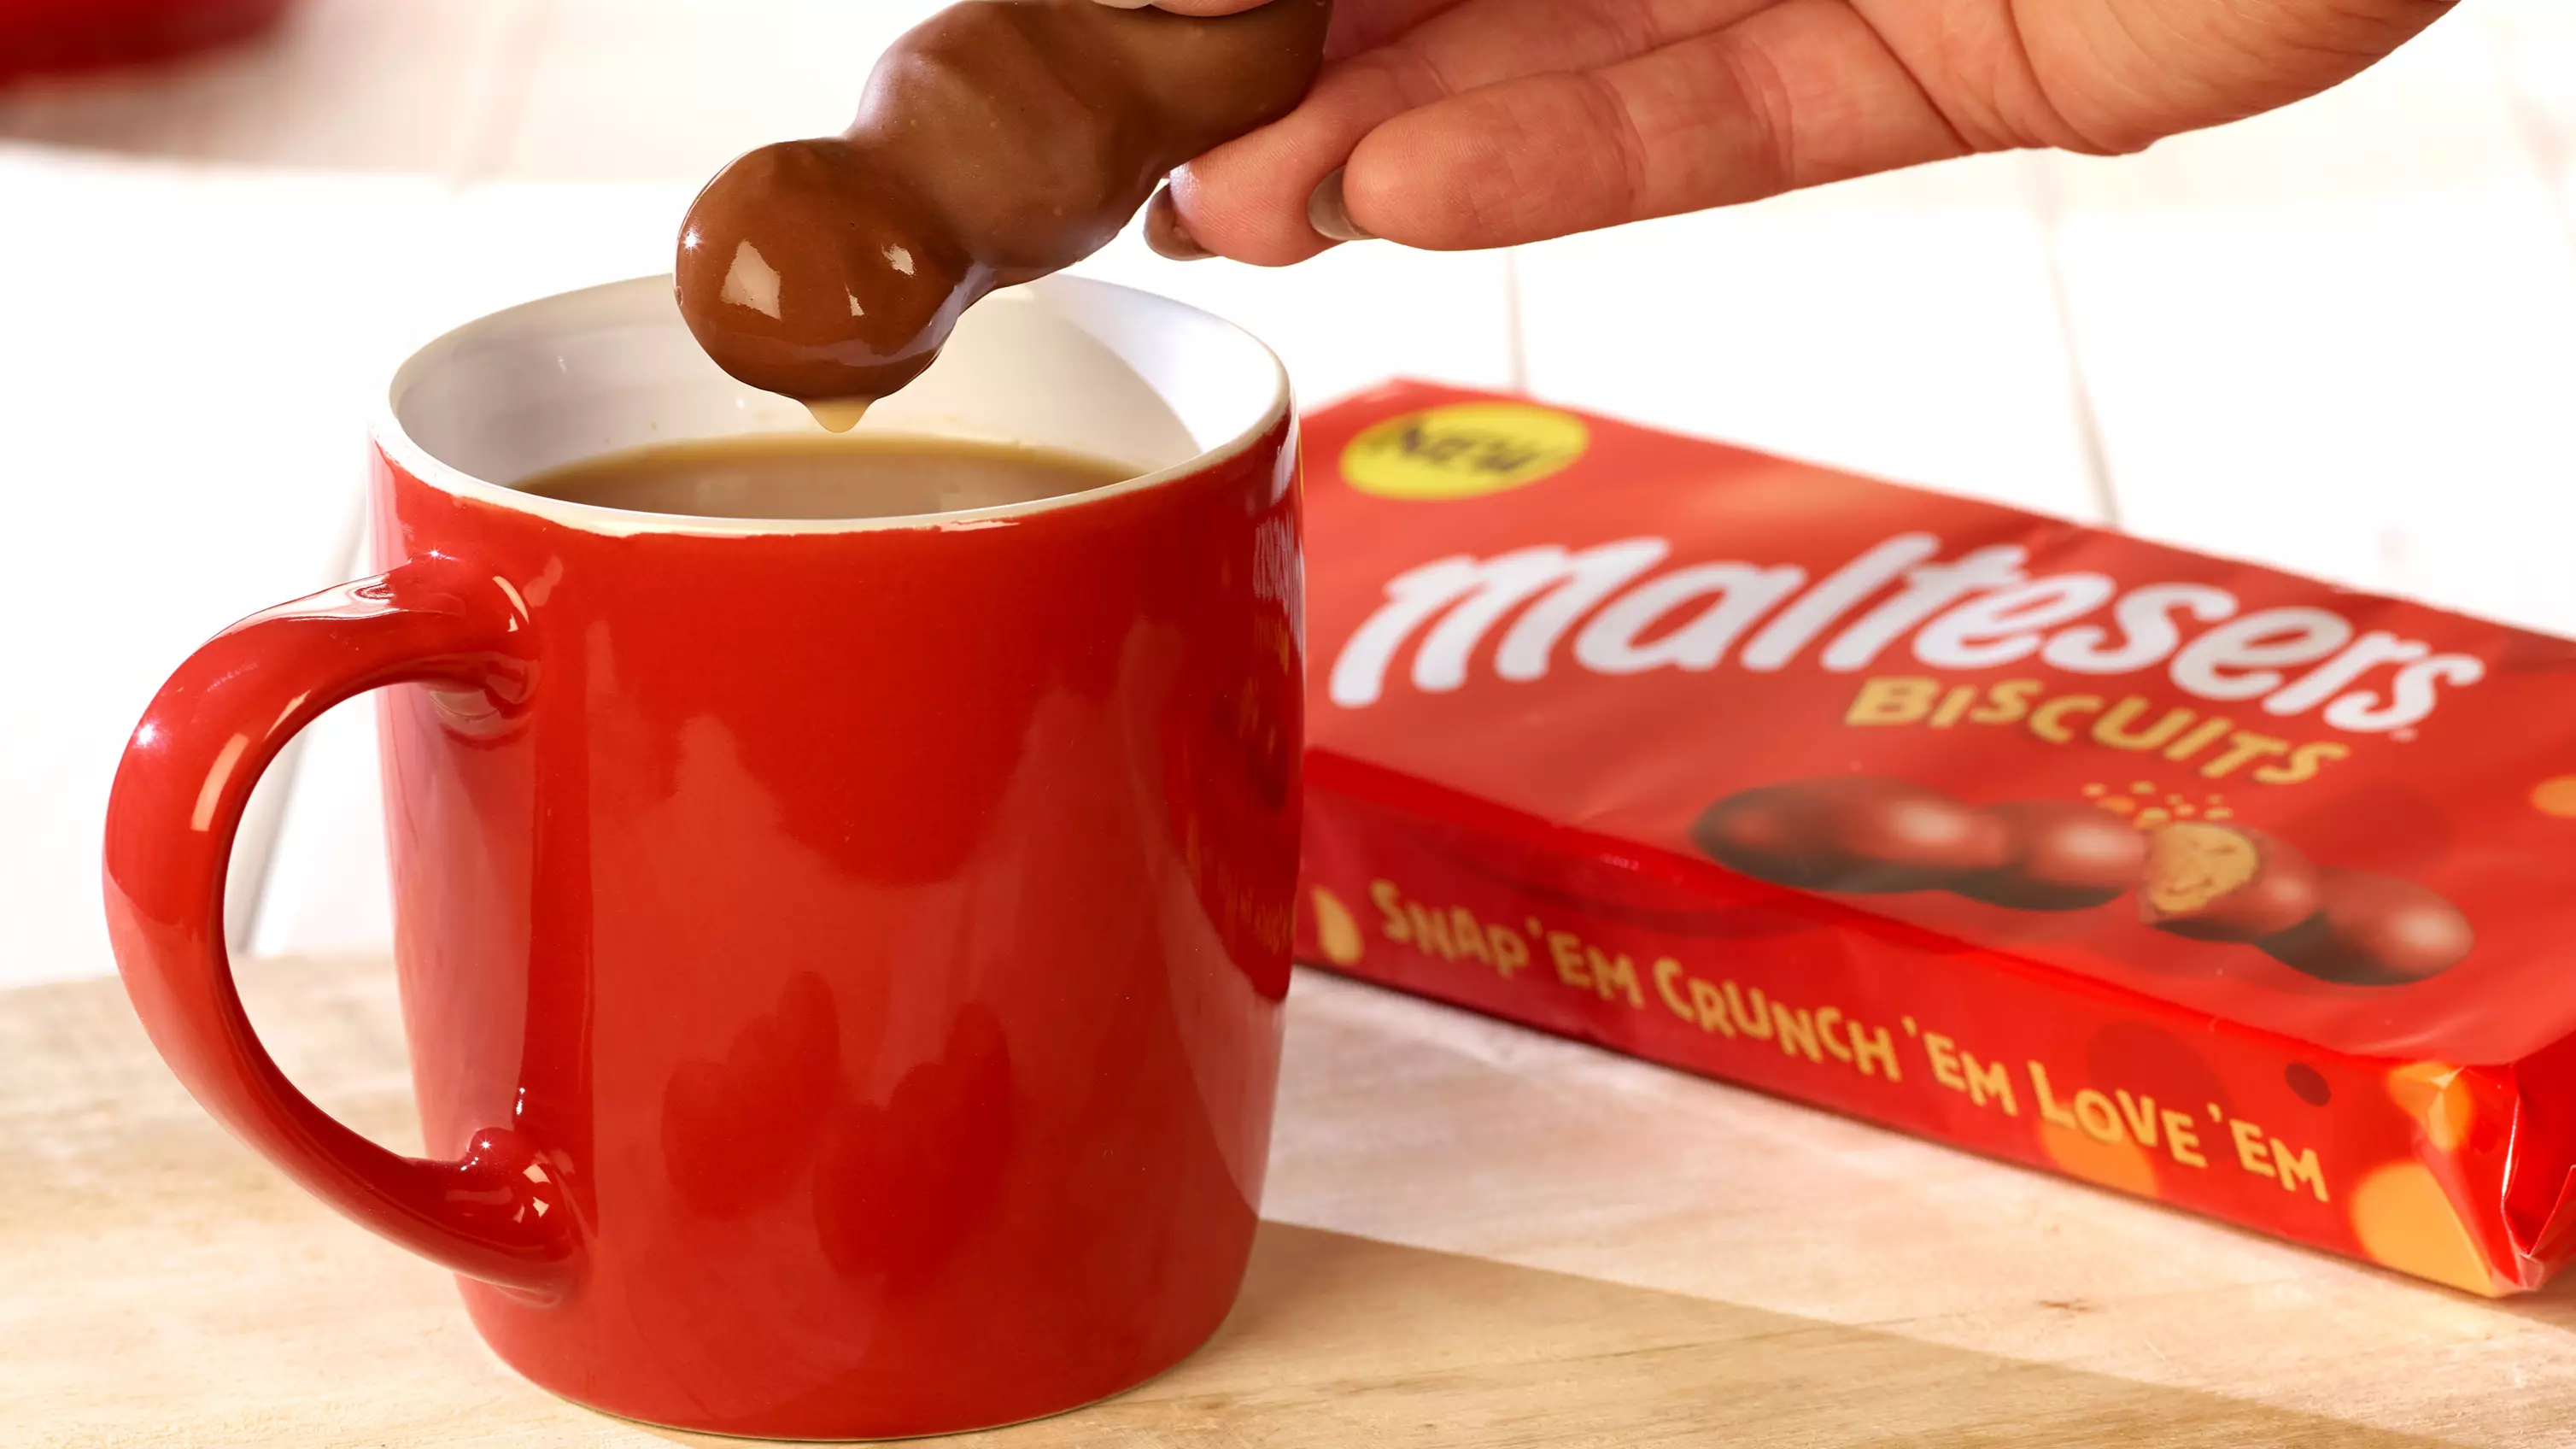 You Can Now Buy Malteser Chocolate Biscuits And We Need Them Immediately